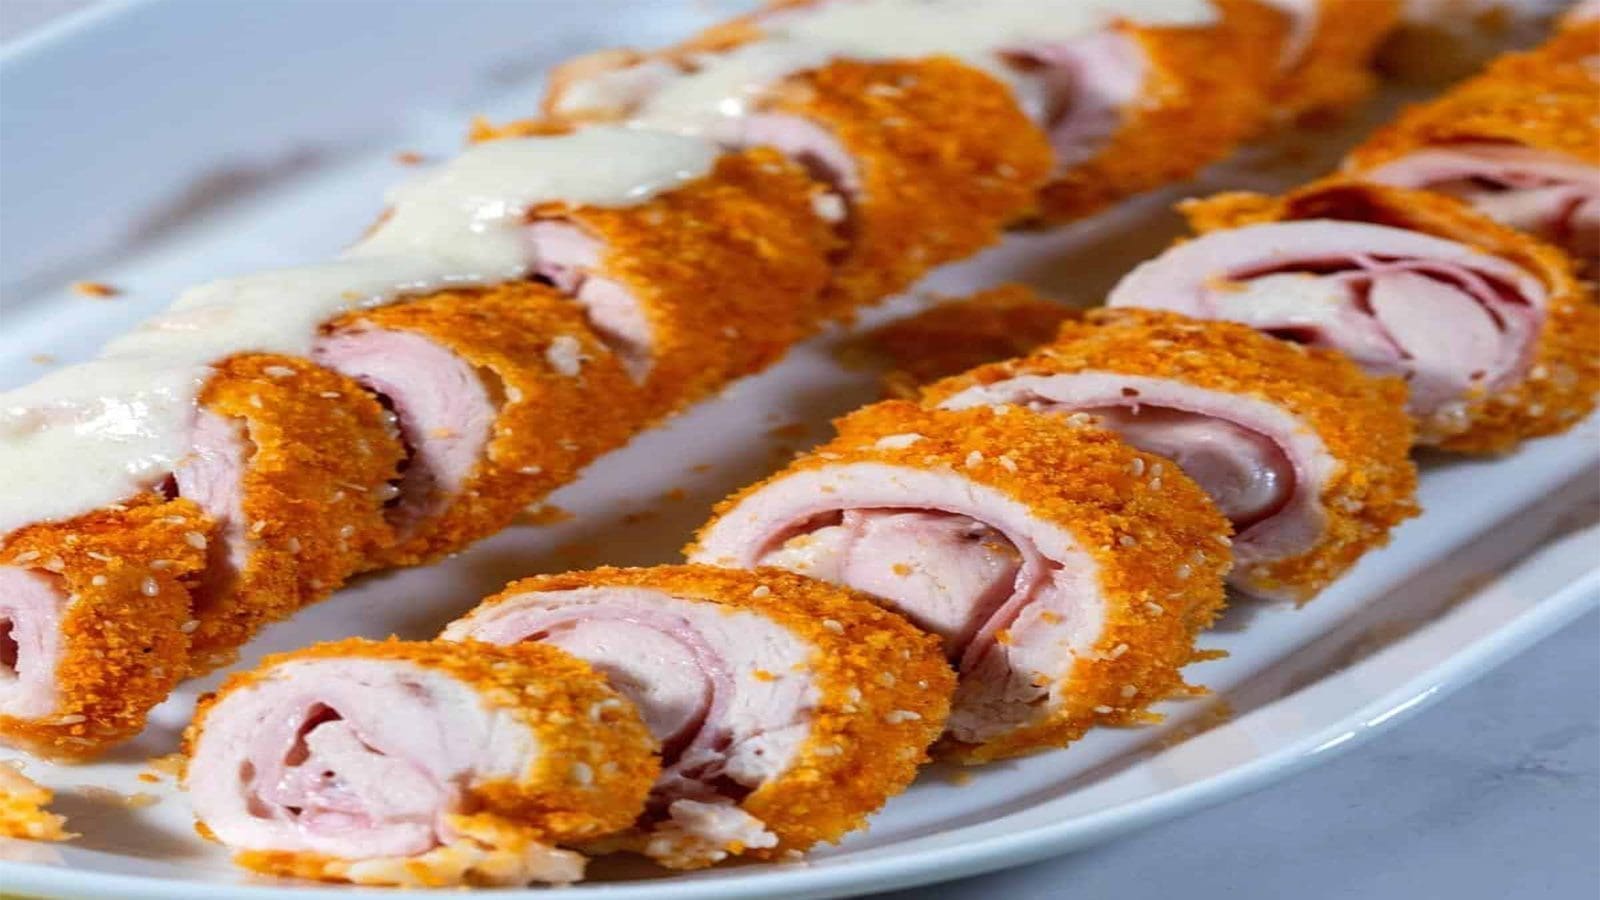 USDA study finds Salmonella in breaded stuffed chicken products sold at retail stores